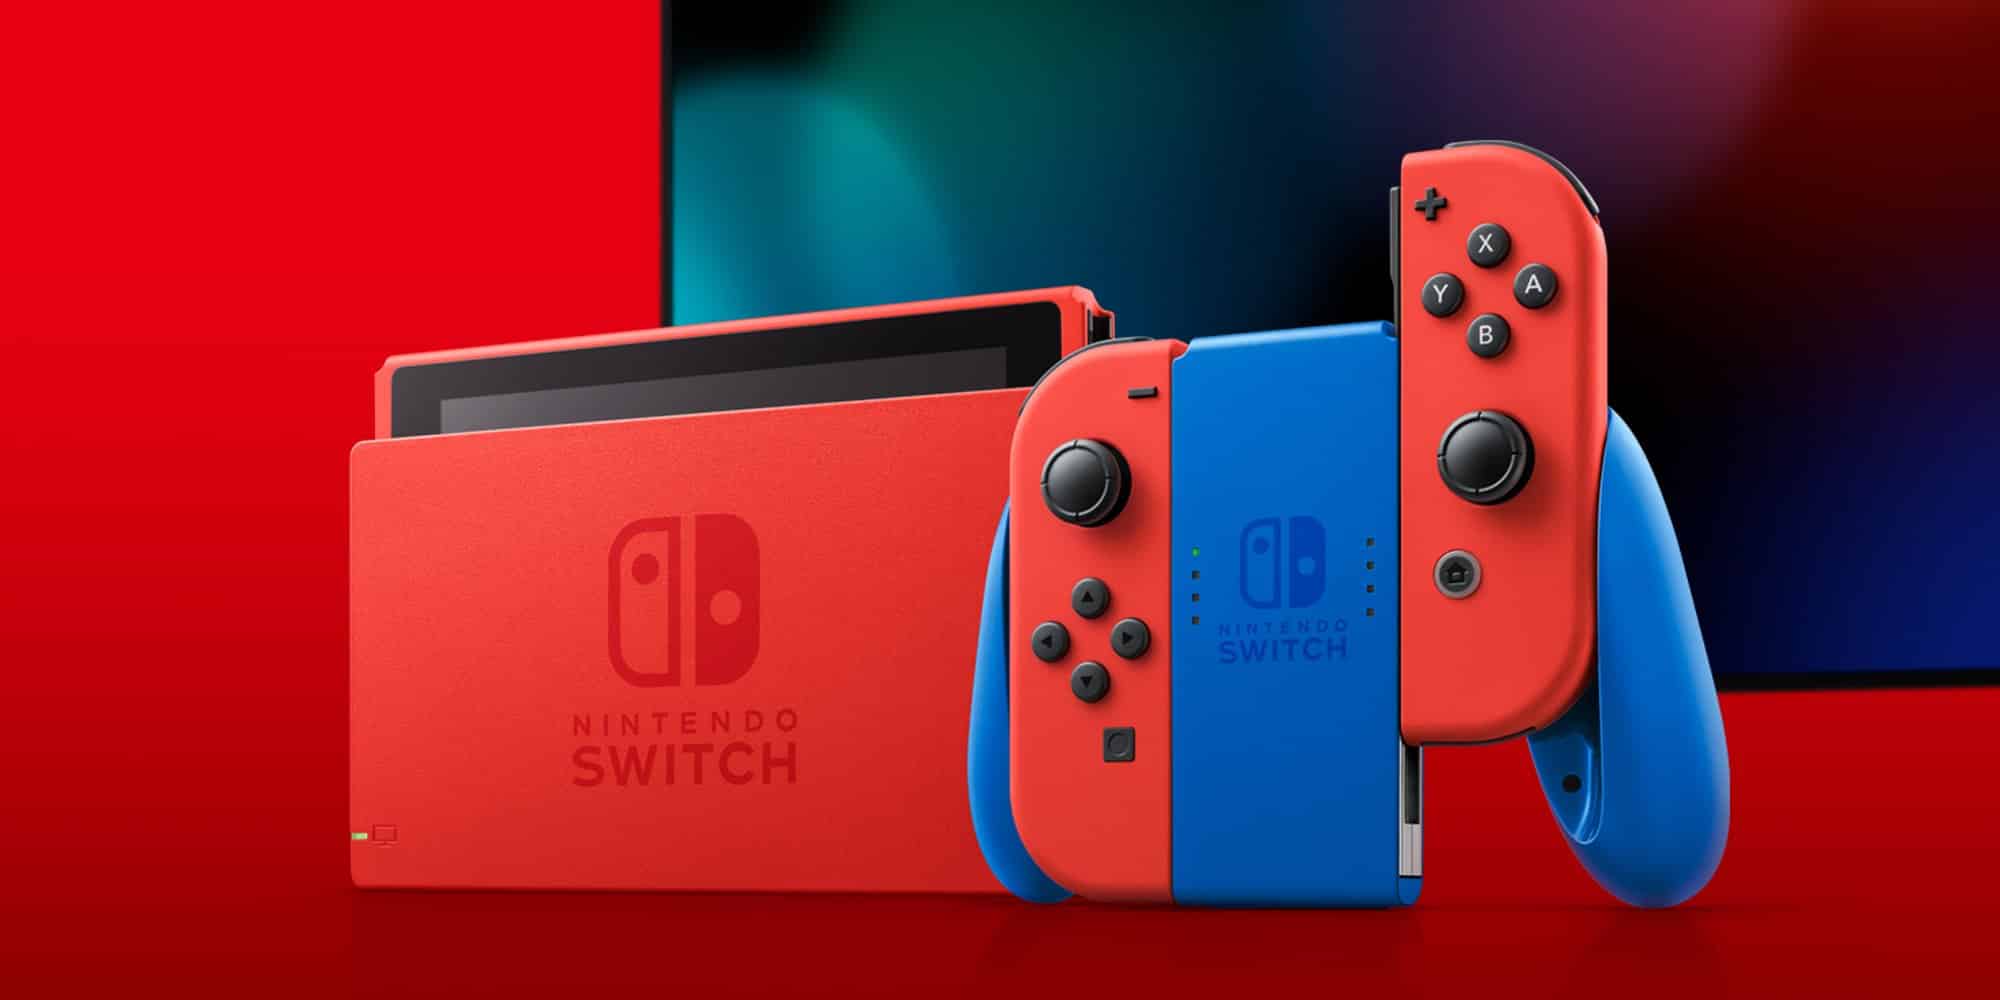 5 Best Nintendo Switch Emulators For PC and Phone in 2023